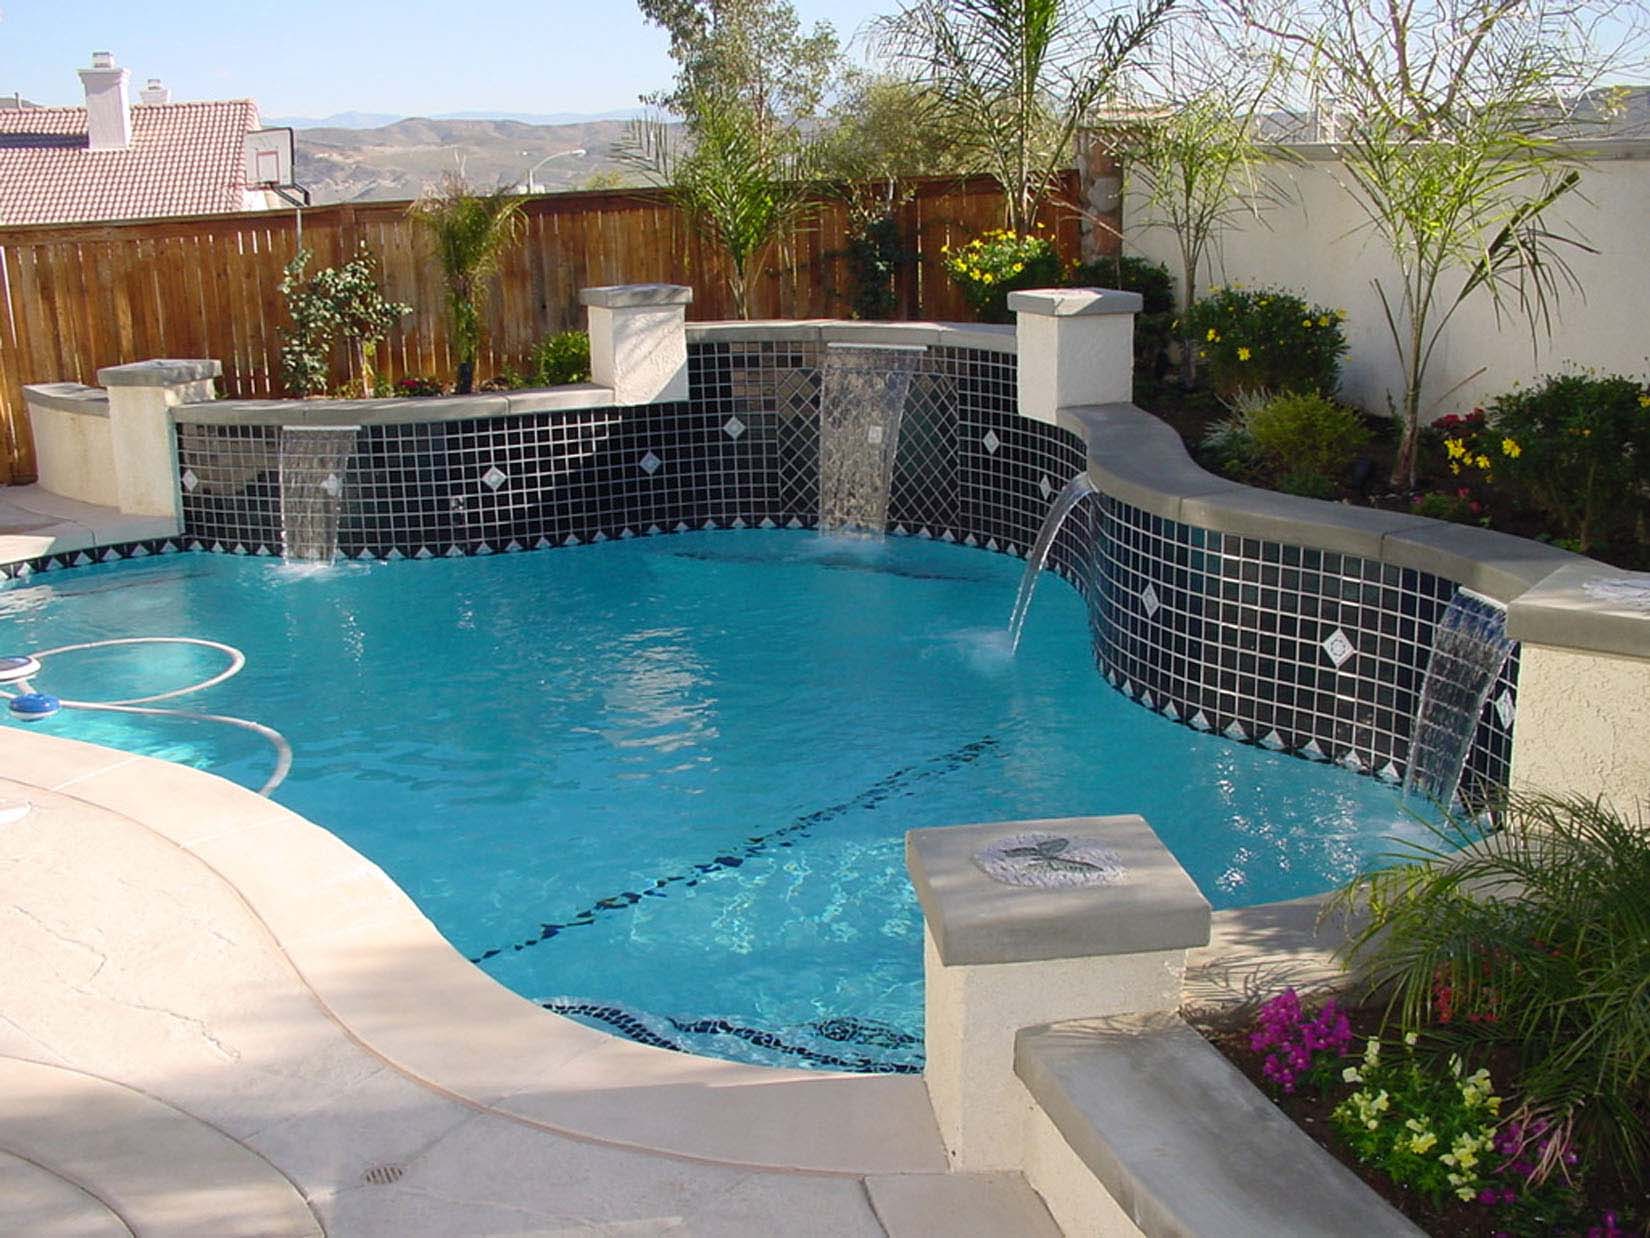 How to Build Your Own Swimming Pools How to Build Your Own Pool